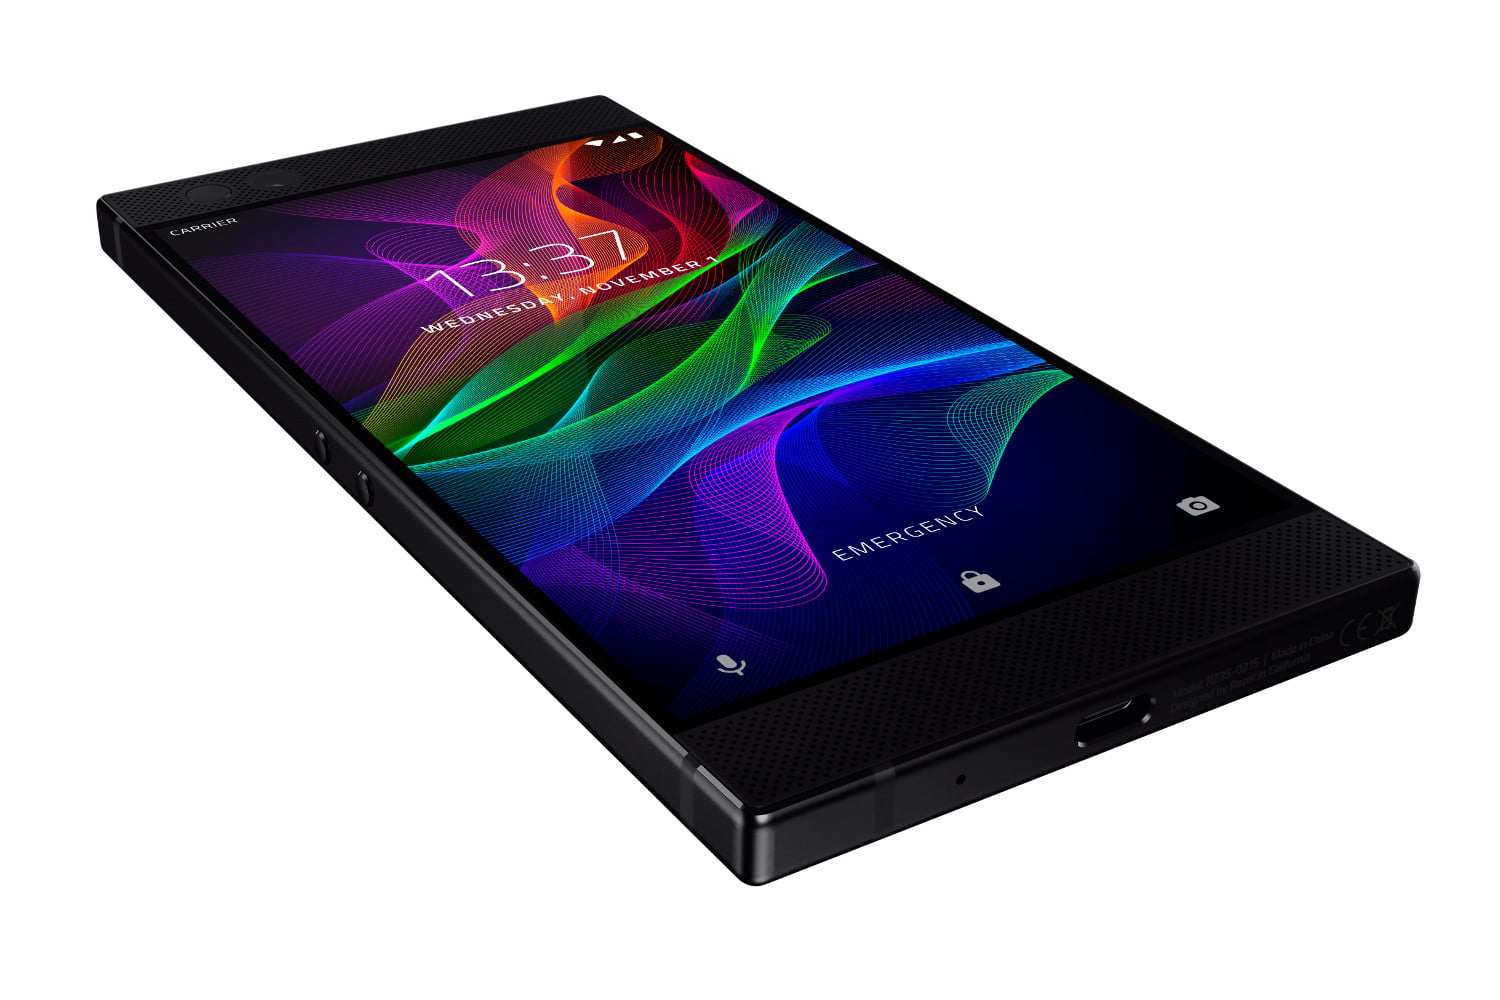 Gaming centered phone from Razer comes with a 120Hz refresh rate